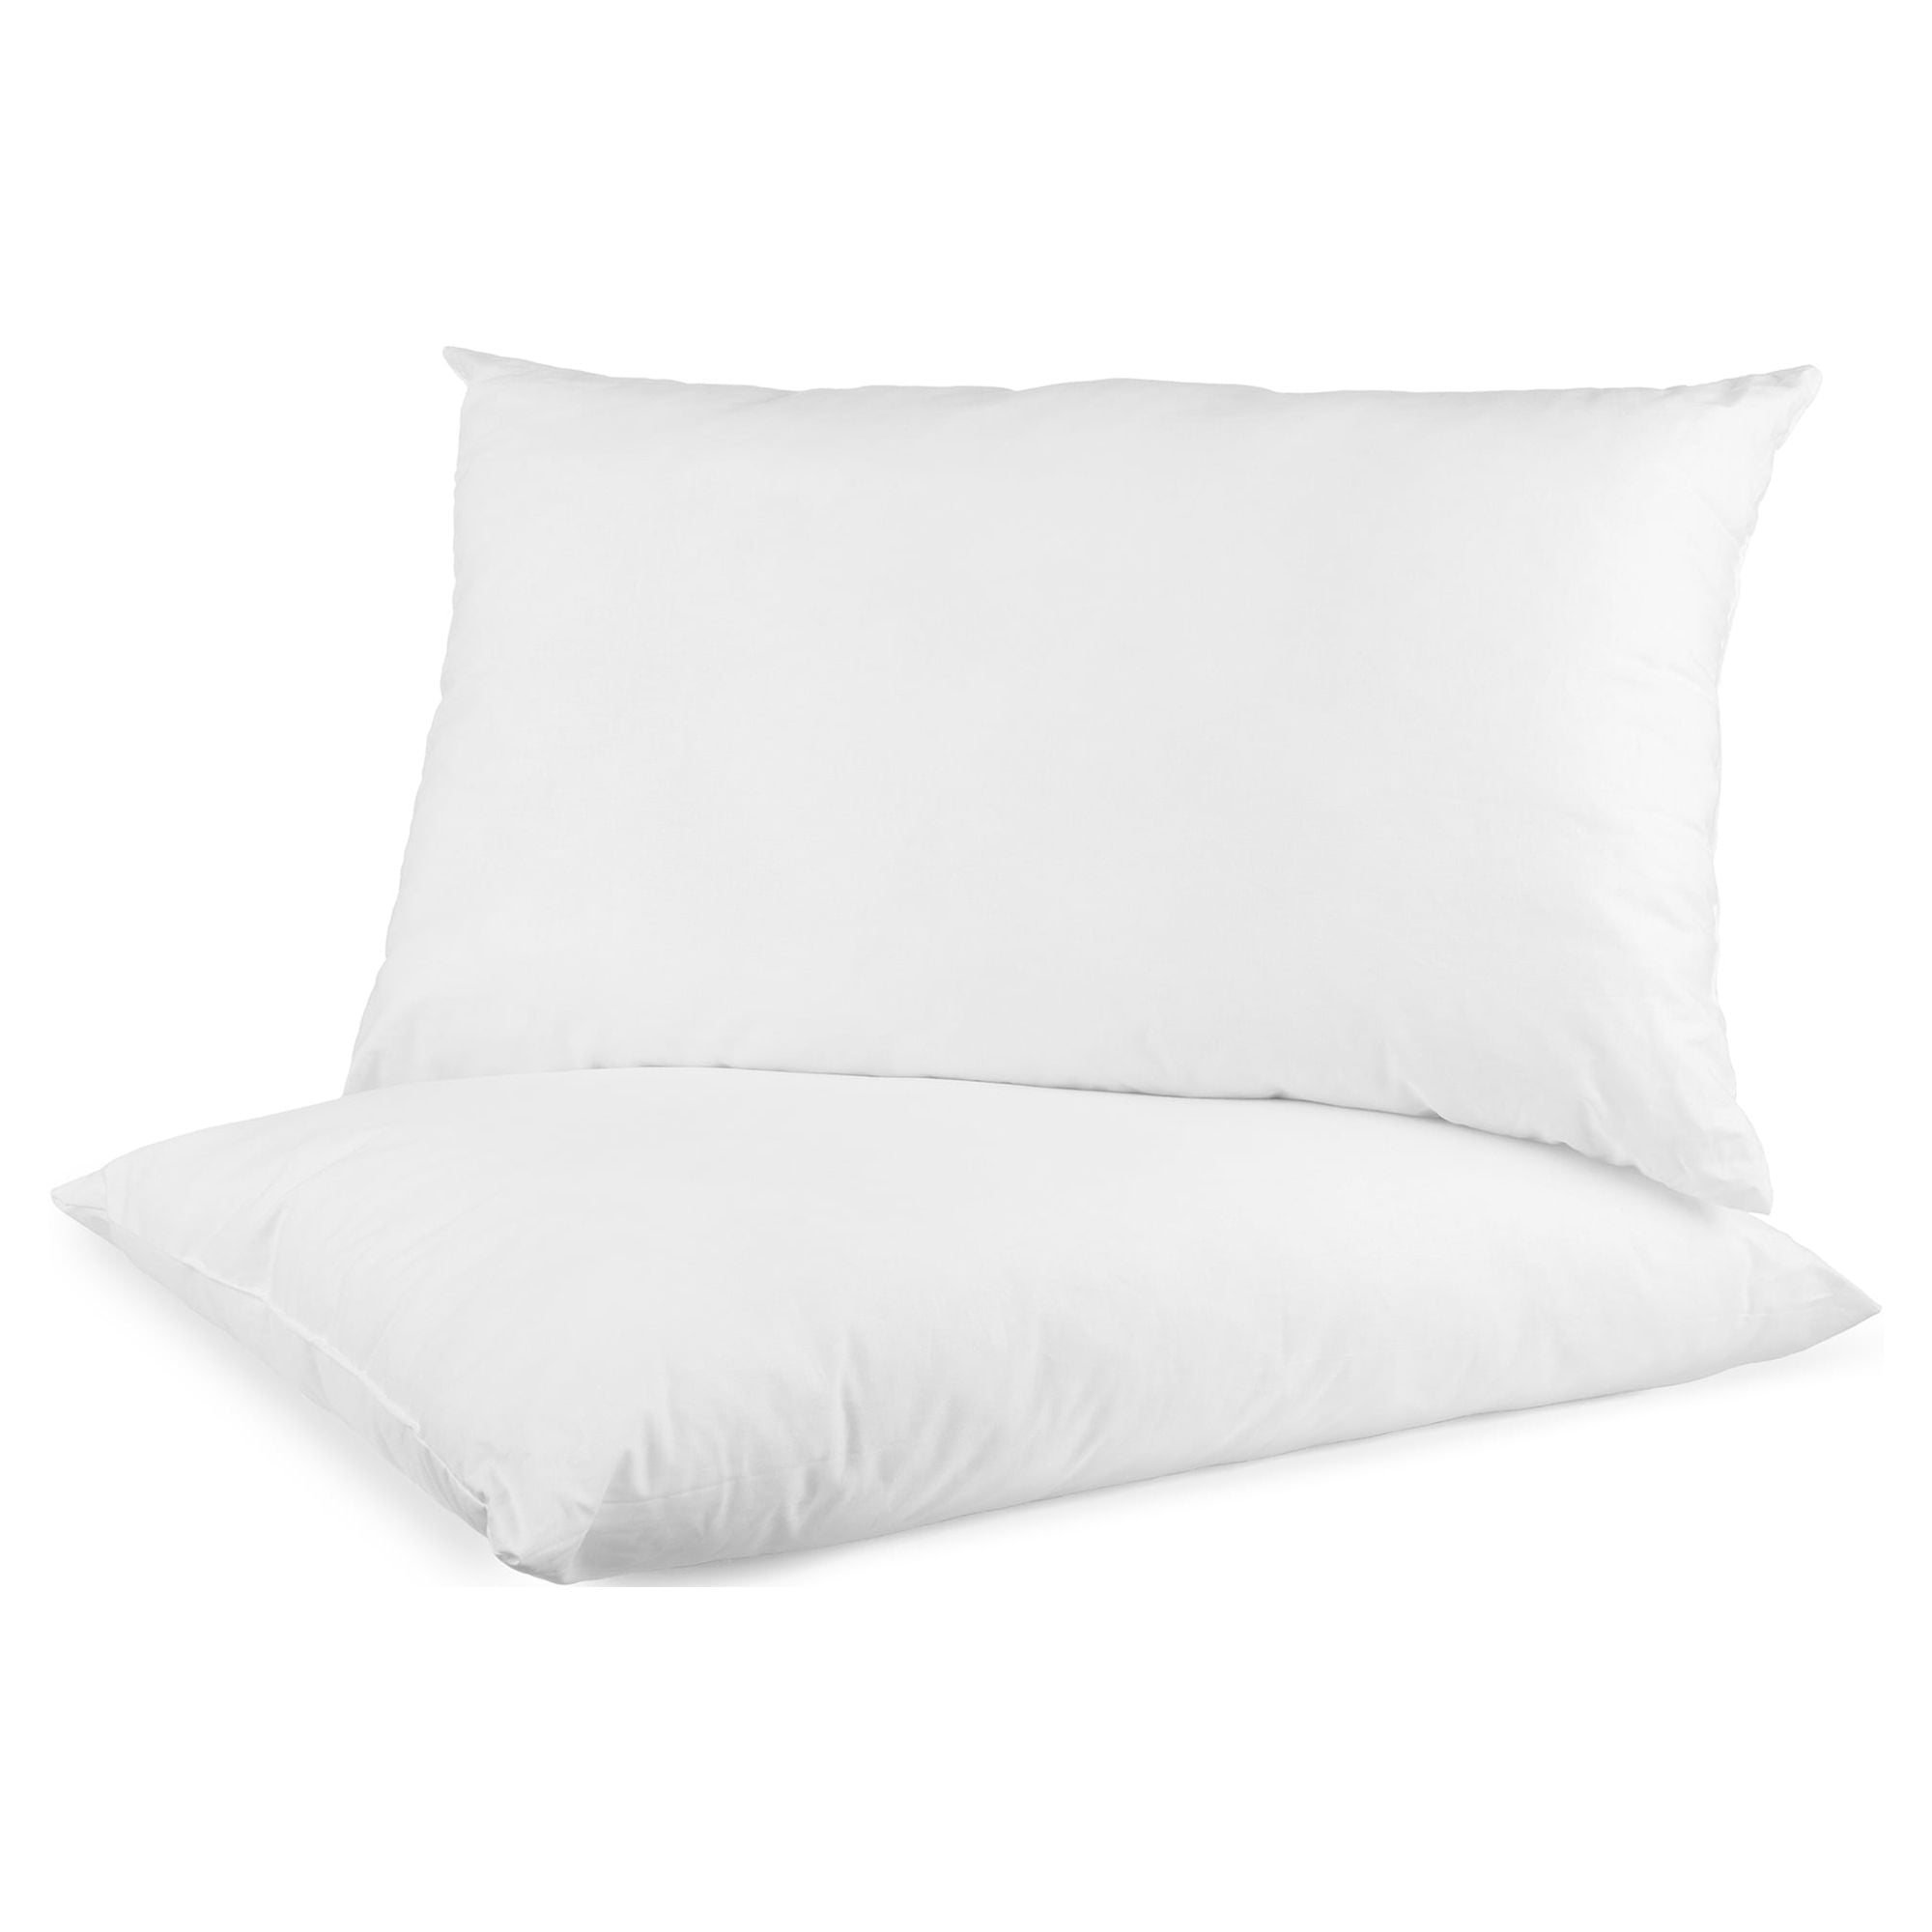 1200 Thread Count 100% Egyptian Cotton Stripe Hotel Pillows, Super Plush Bed Pillows for Side Back & Stomach Sleepers, Cooling Gel-Infused Filling, 2